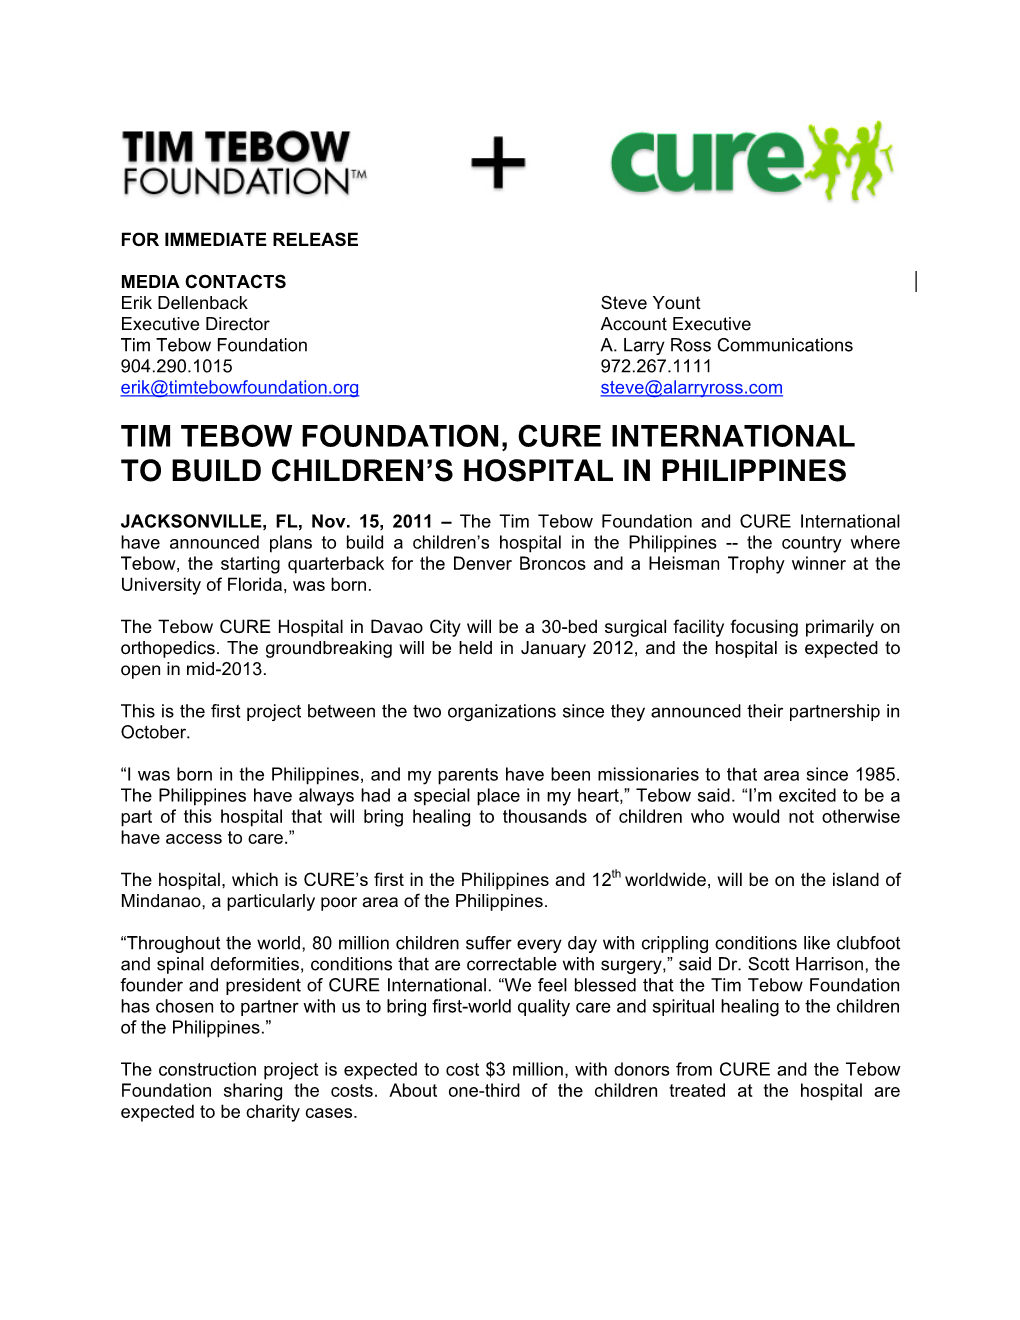 Tim Tebow Foundation, Cure International to Build Children's